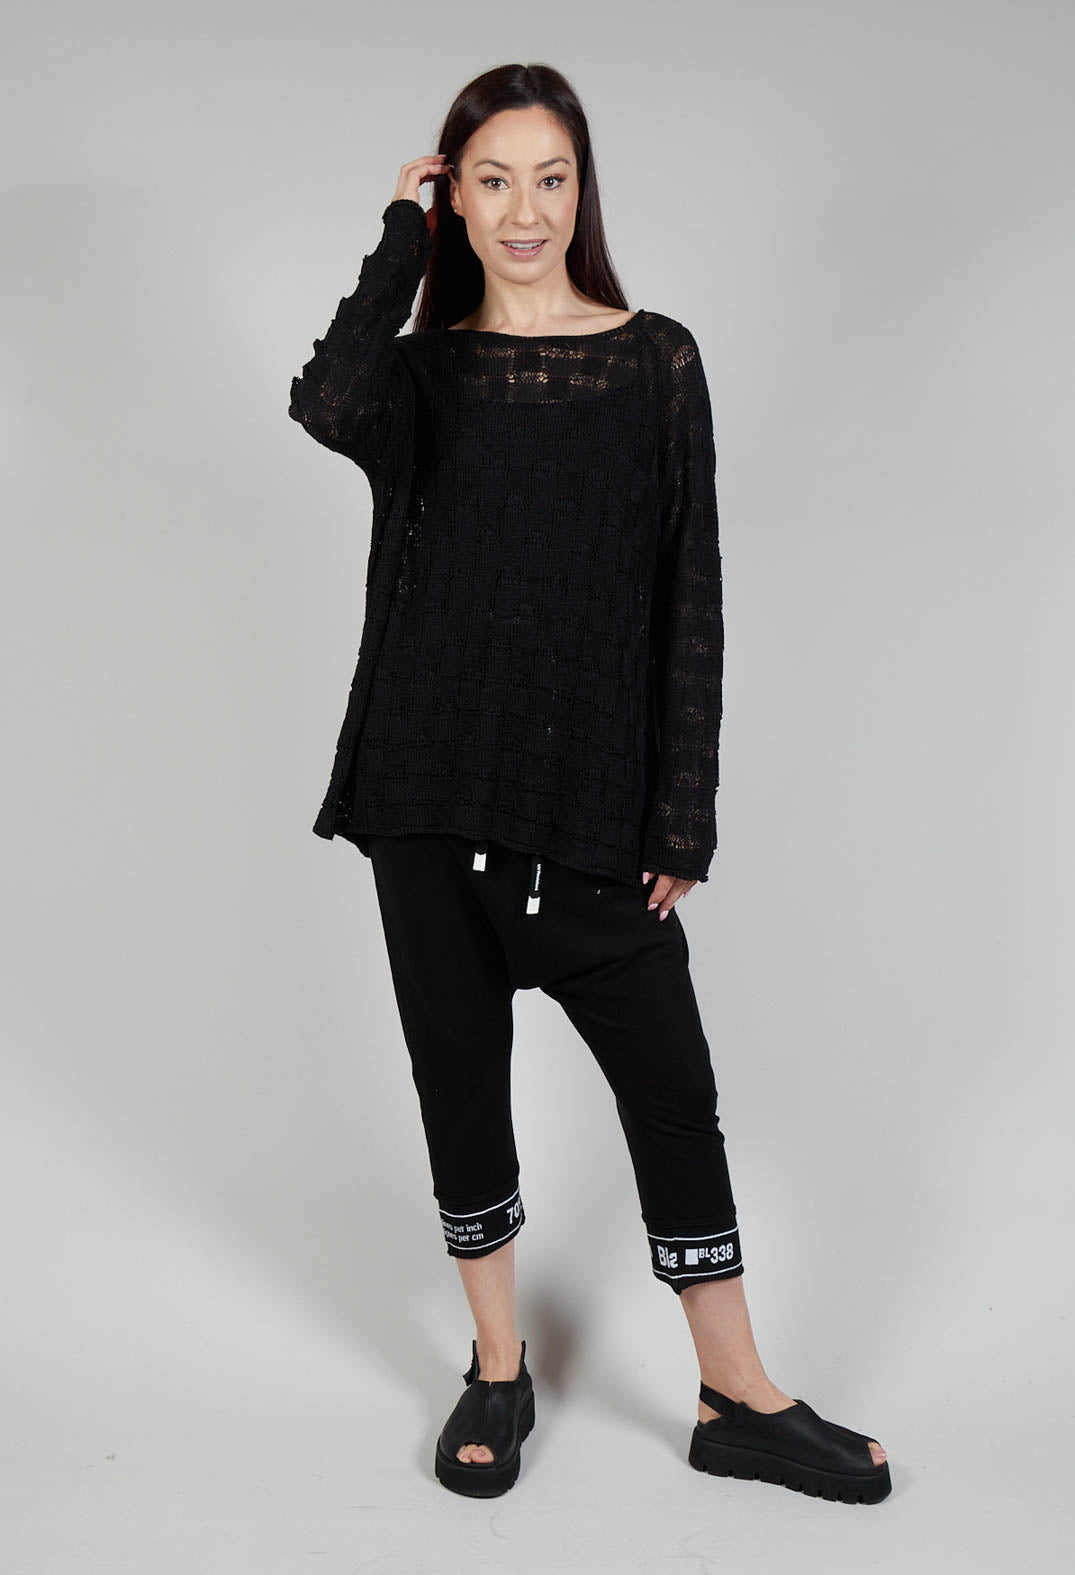 Jumper with Square Detail Knit in Black